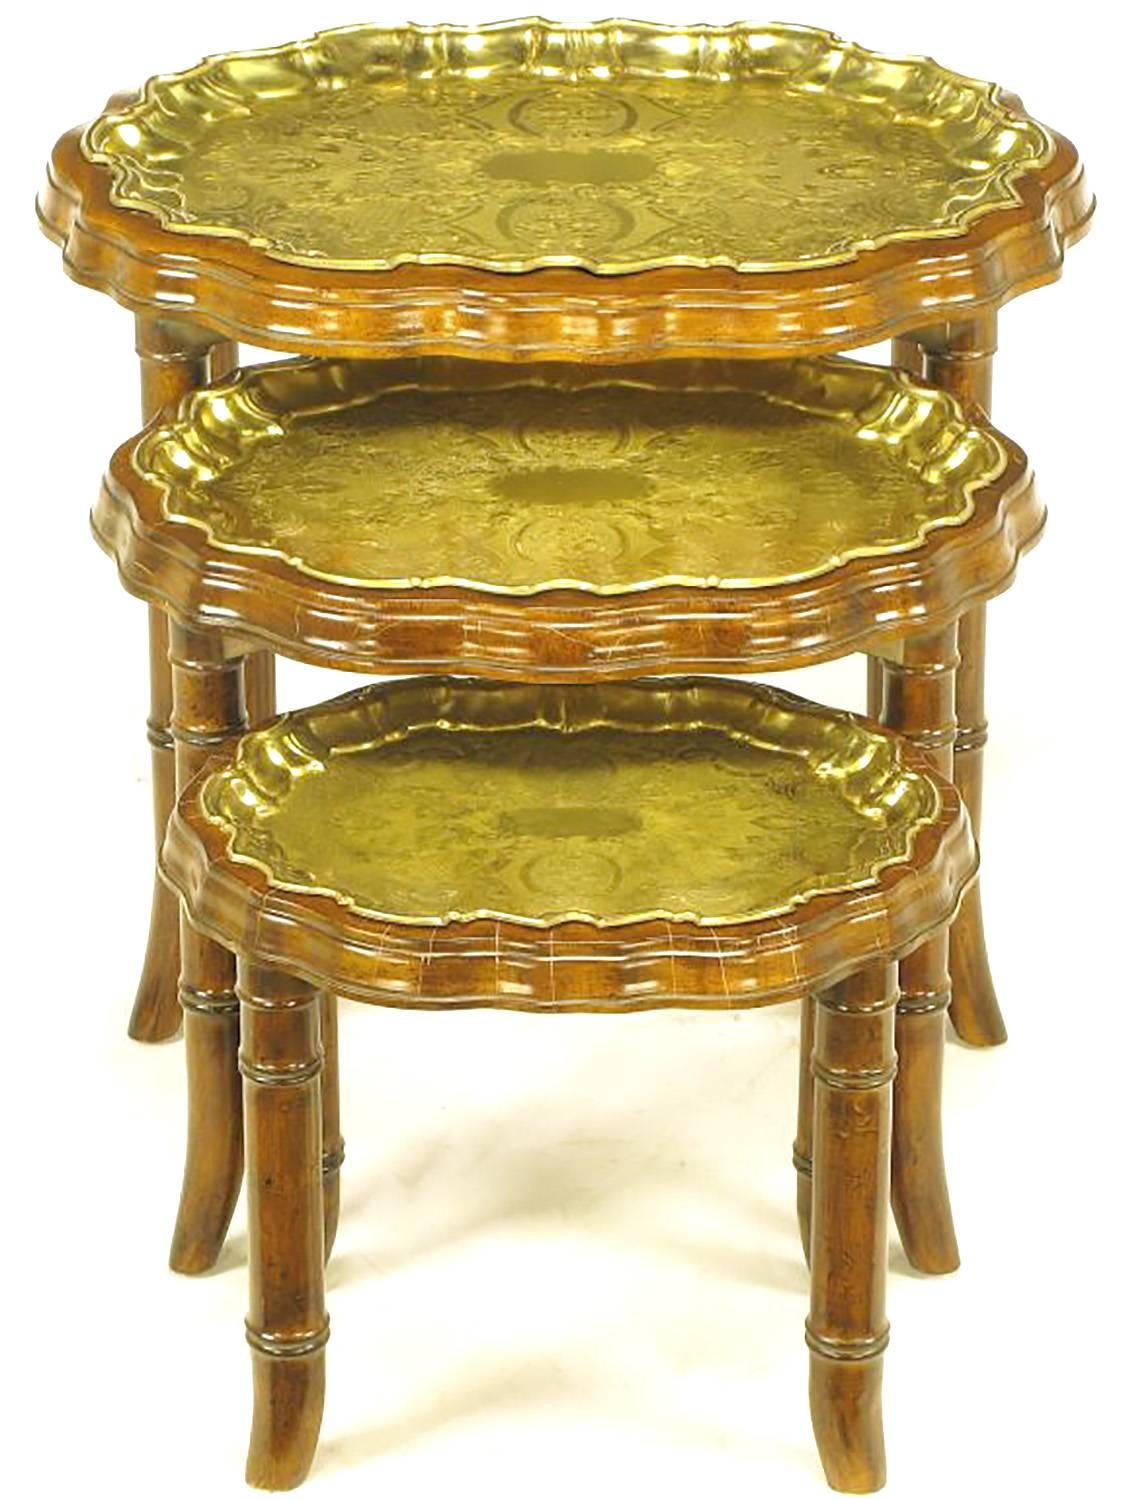 Set of three carved walnut wood, bamboo-form stacking/nesting tables with removable molded and etched brass trays that mirror the scalloped edge tops. Substantial in weight and very well manufactured.

Individual dimensions:

Small 13.5